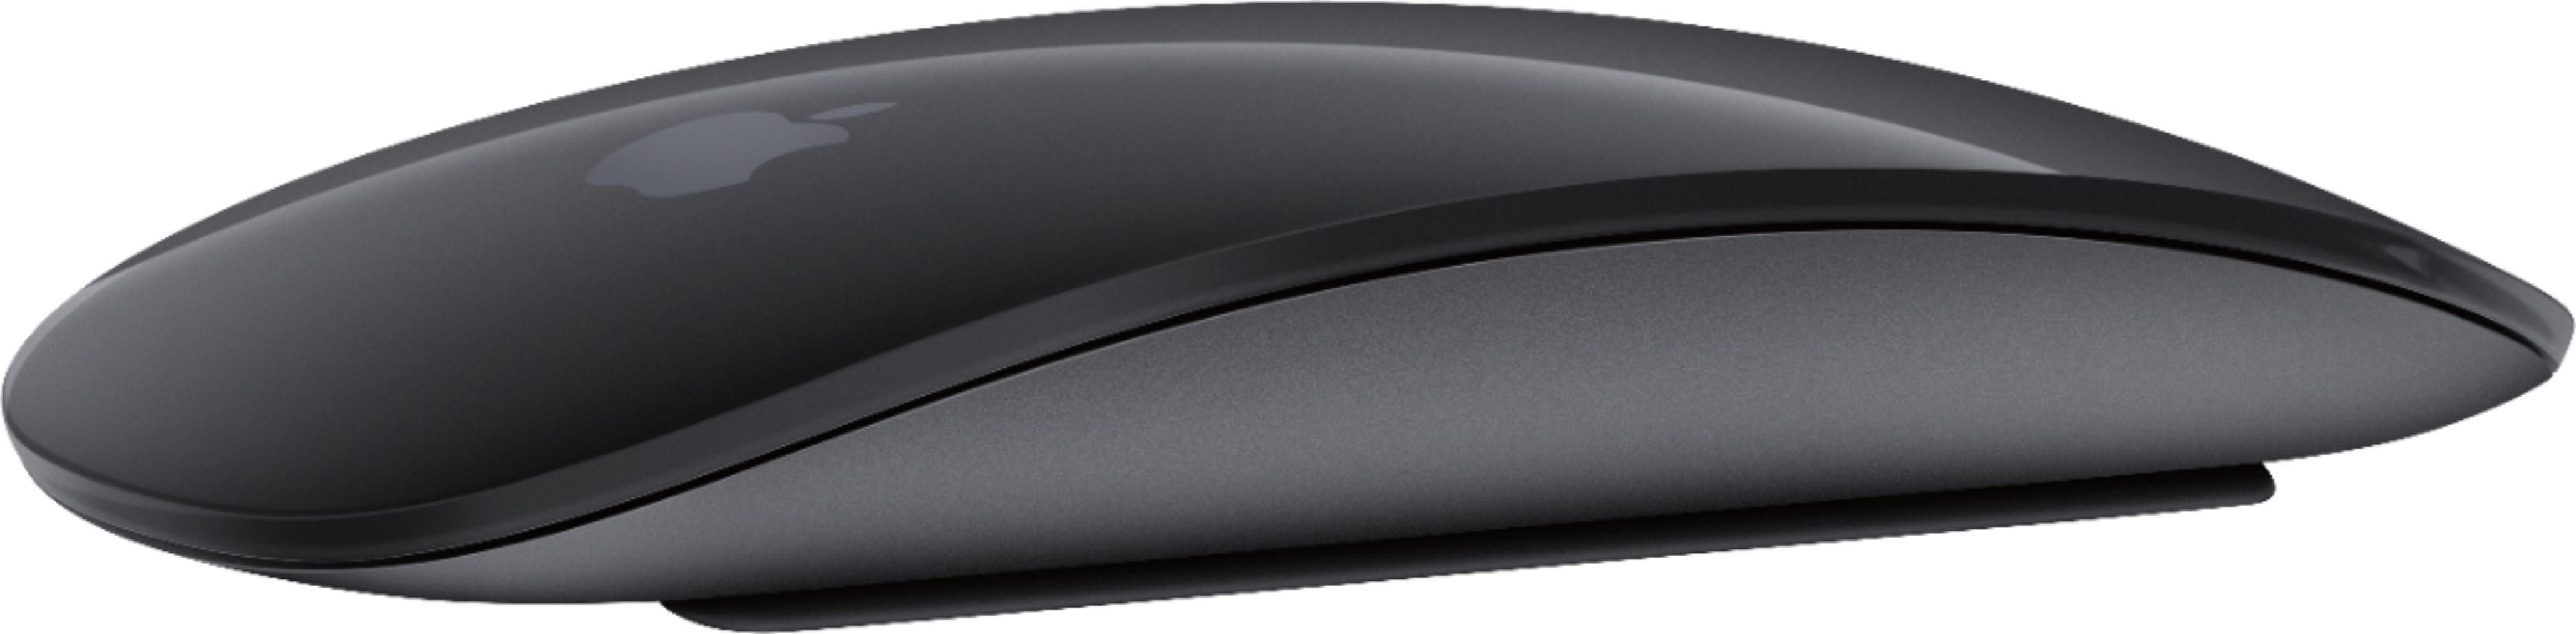 Video: Apple's Lightning-equipped Magic Mouse 2 gets unboxed and reviewed -  9to5Mac